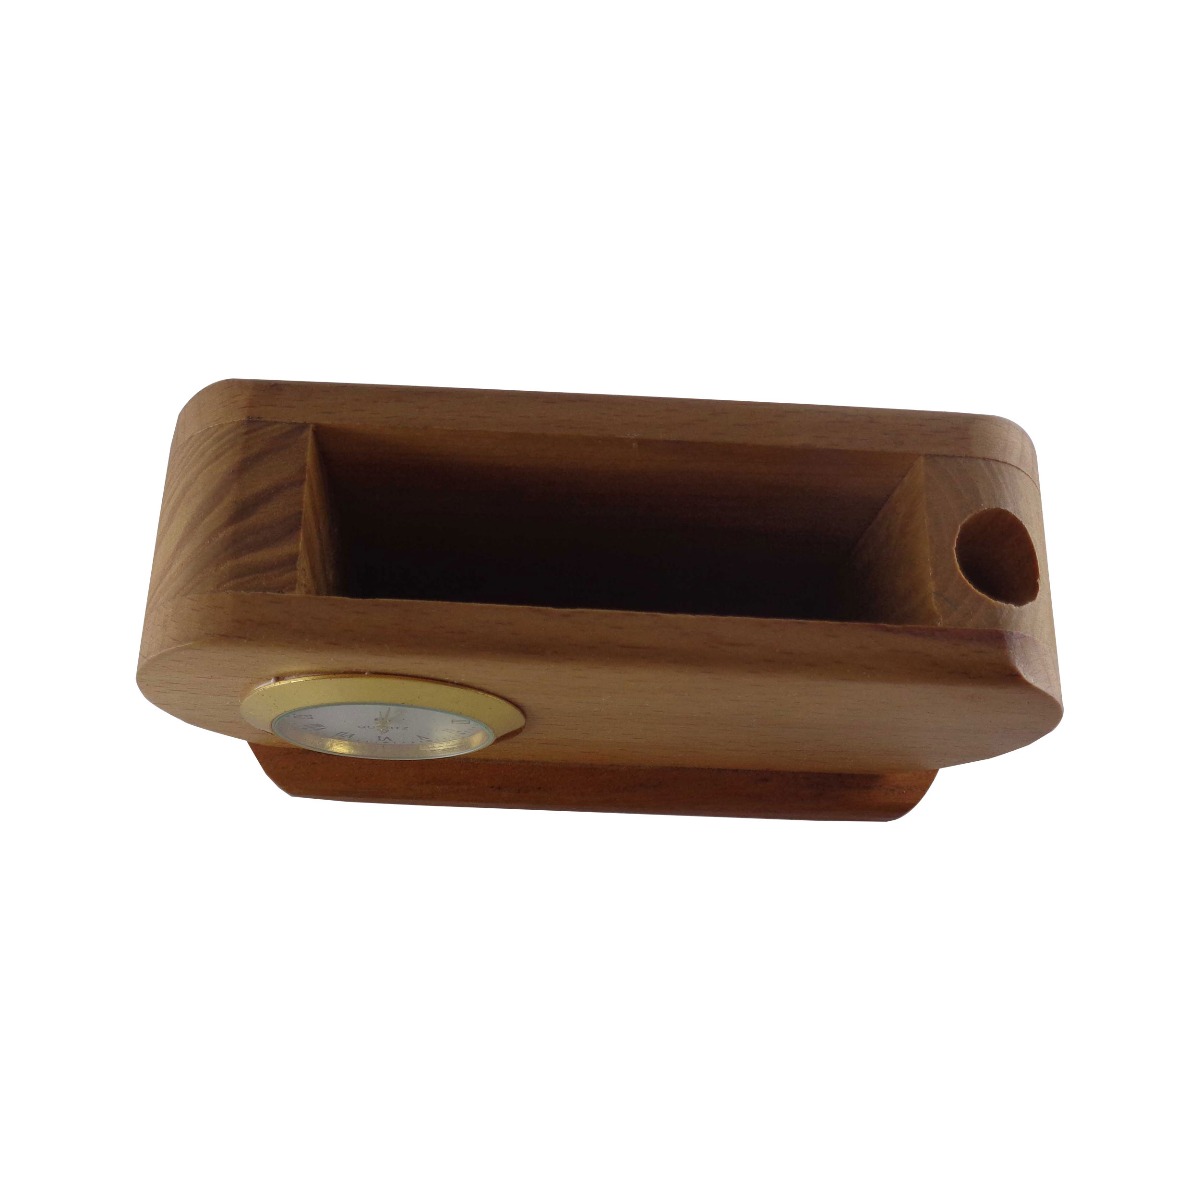 penhouse Model: 13759 Wooden pen stand with clock and card holder